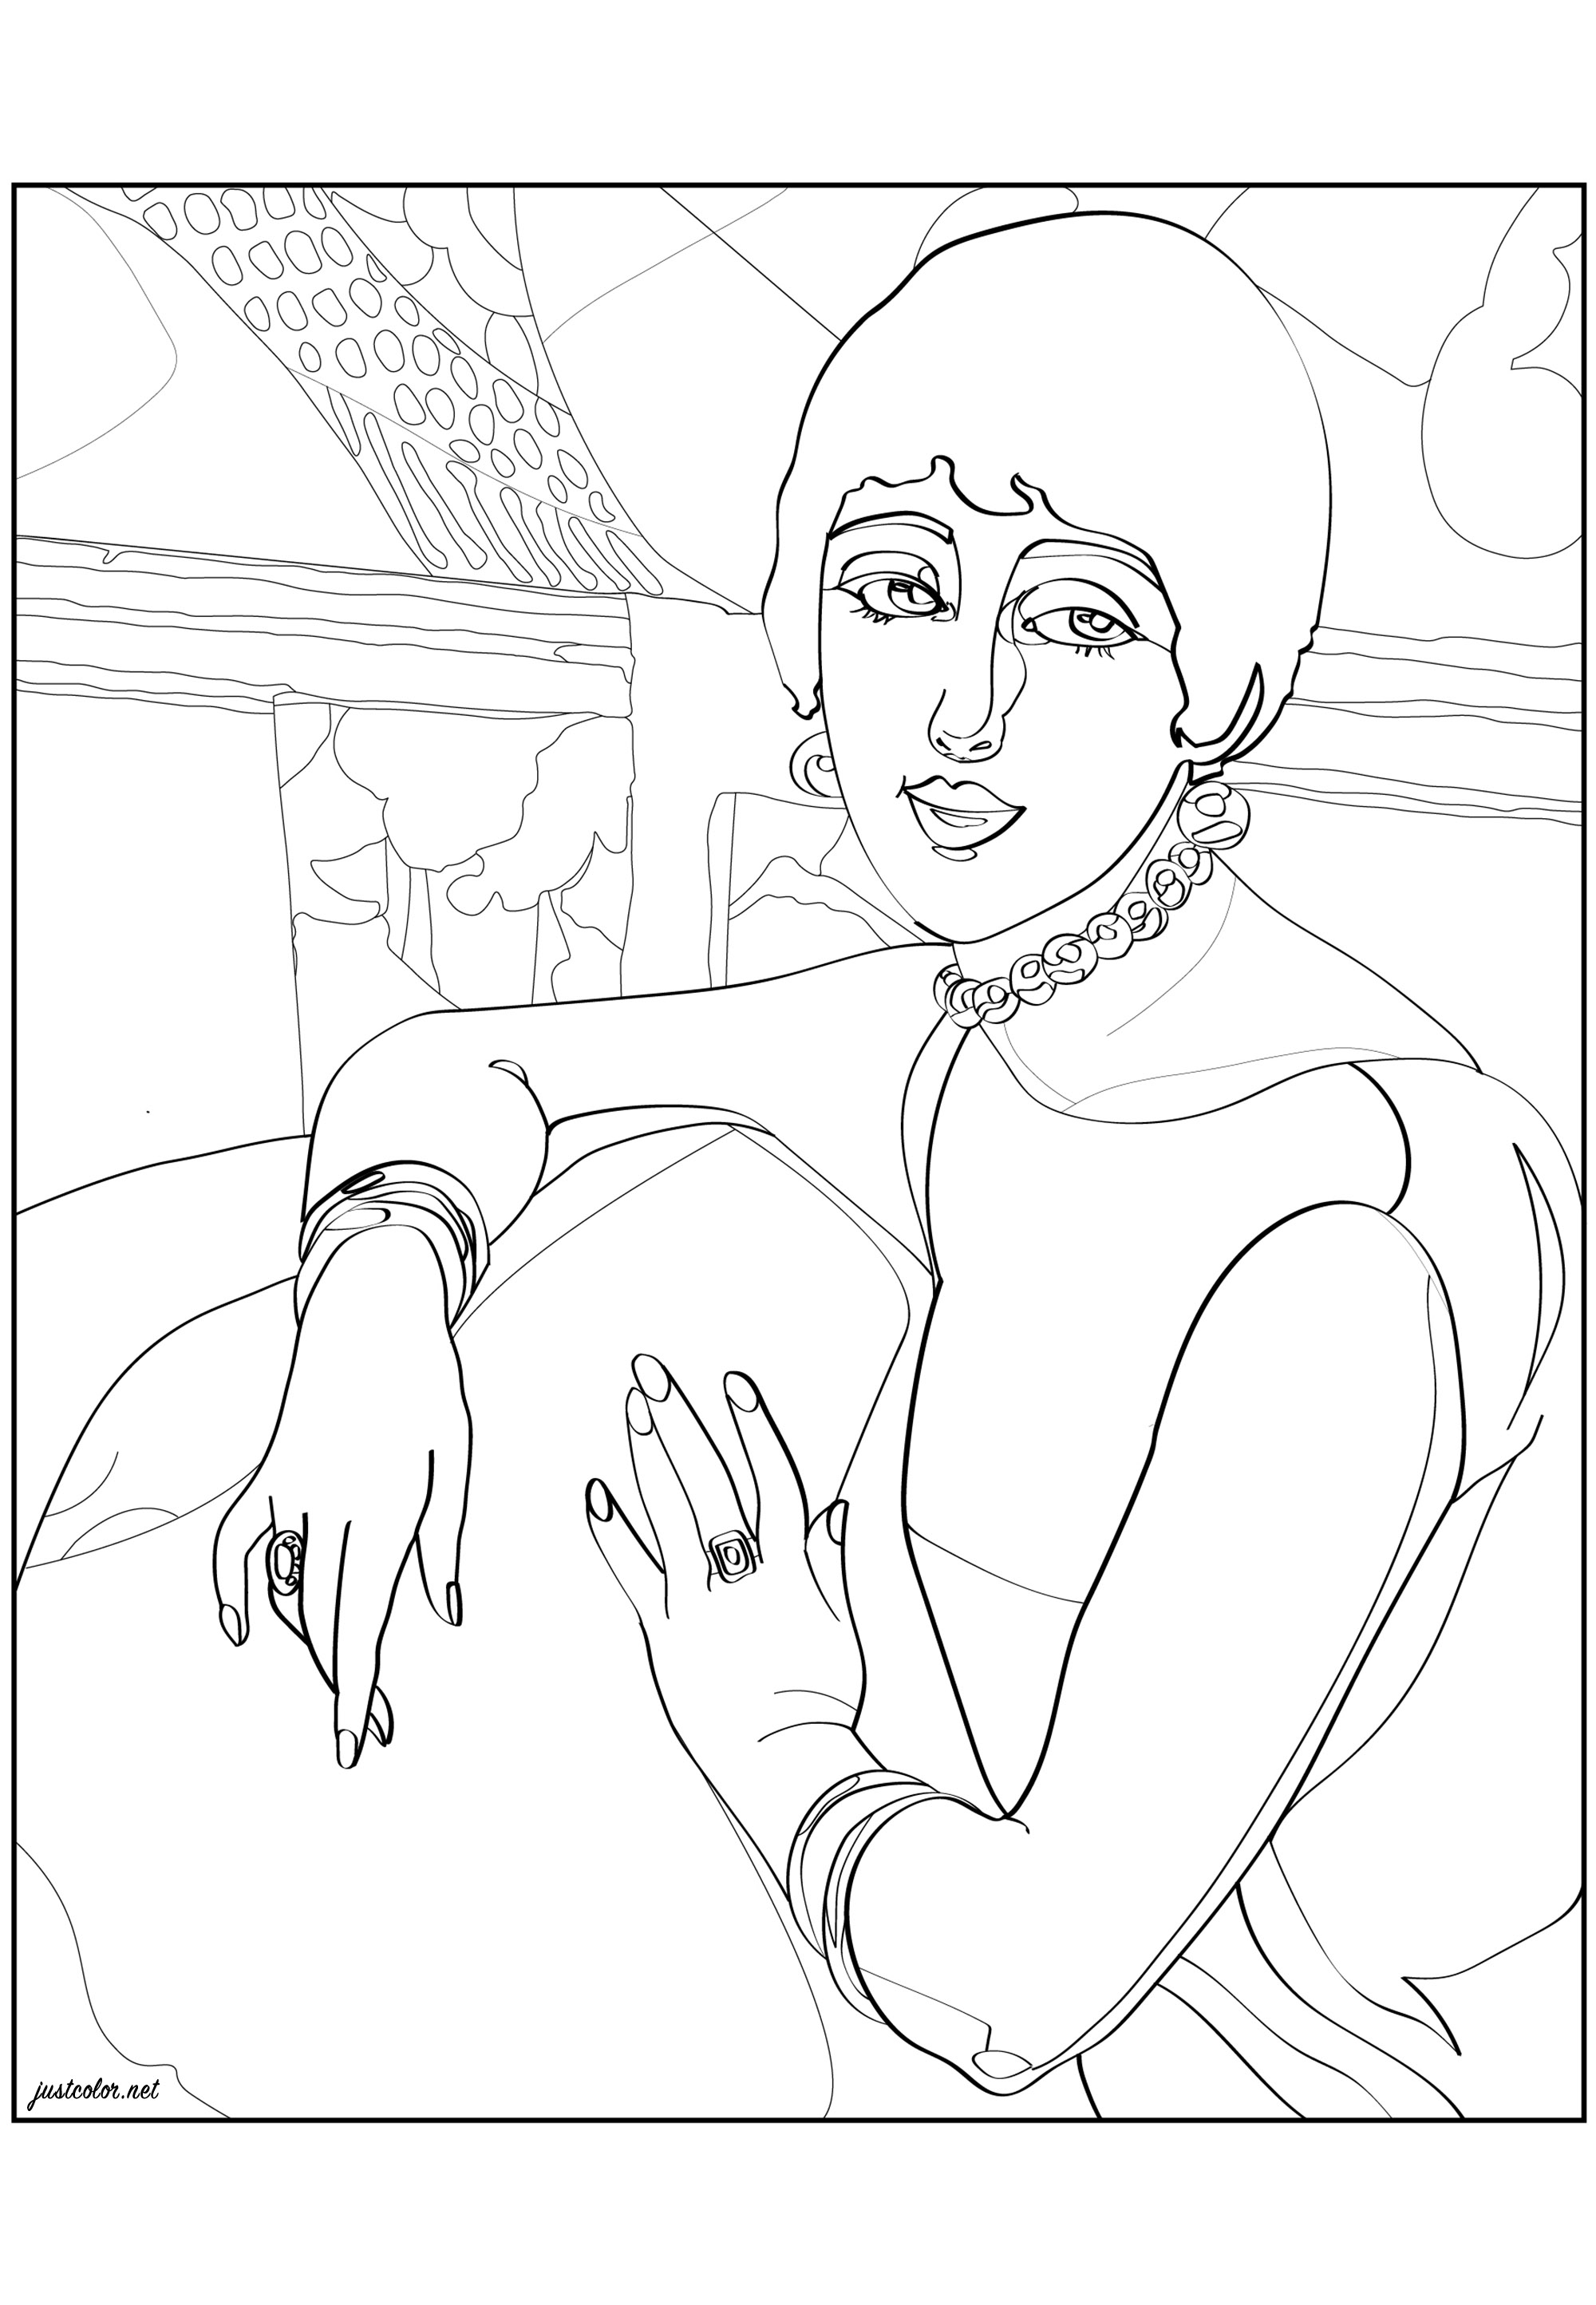 Coloring page created from Gerda Webener's painting 'Lily' (1922)Wegener (Danish illustrator and painter) is known for her fashion illustrations in a unique Art Deco or sometimes Art Nouveau style, and also for her paintings that pushed the boundaries of gender and love of her time. These works were classified as lesbian erotica at times and many were inspired by her partner, the transgender woman Lili Elbe.